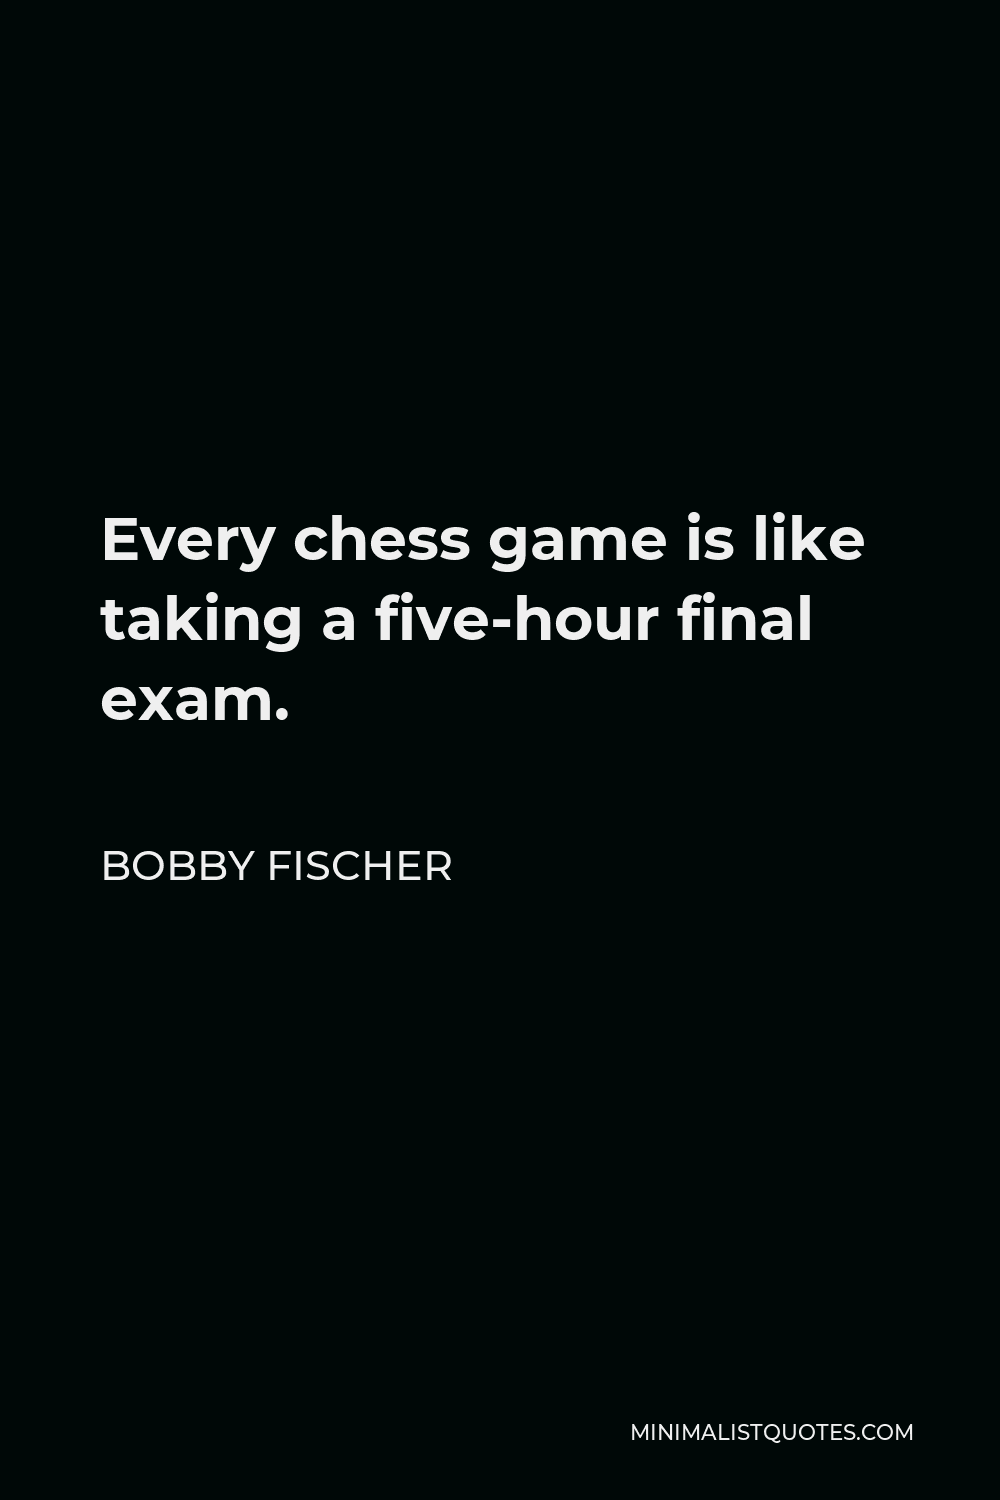 Bobby Fischer Quote - Every chess game is like taking a five-hour final exam.